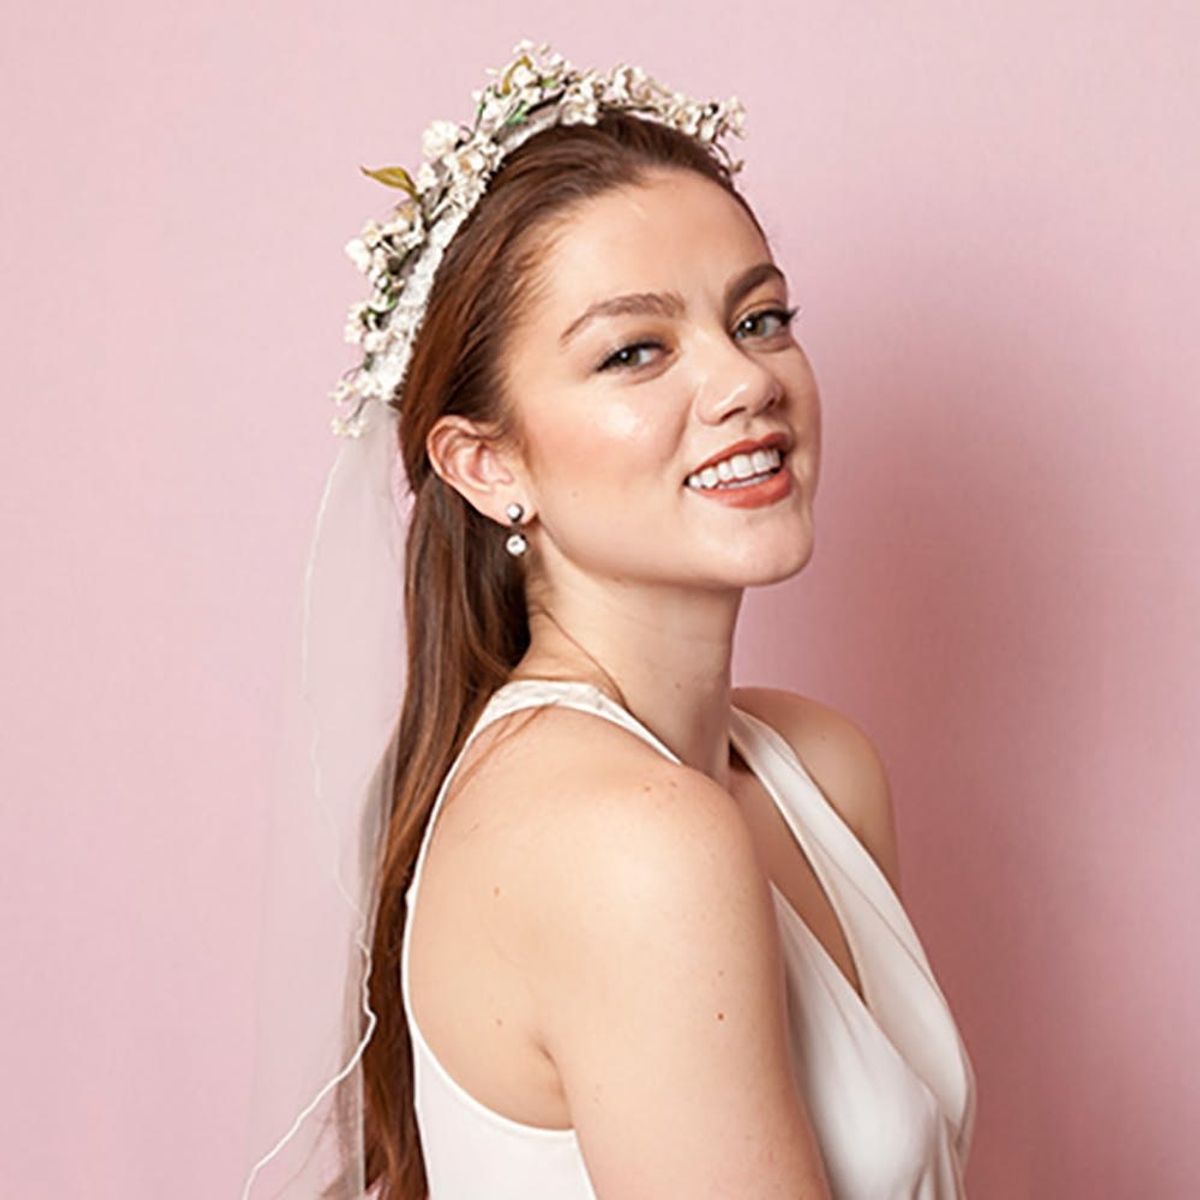 The Ultimate Hair Hack for the Boho Bride